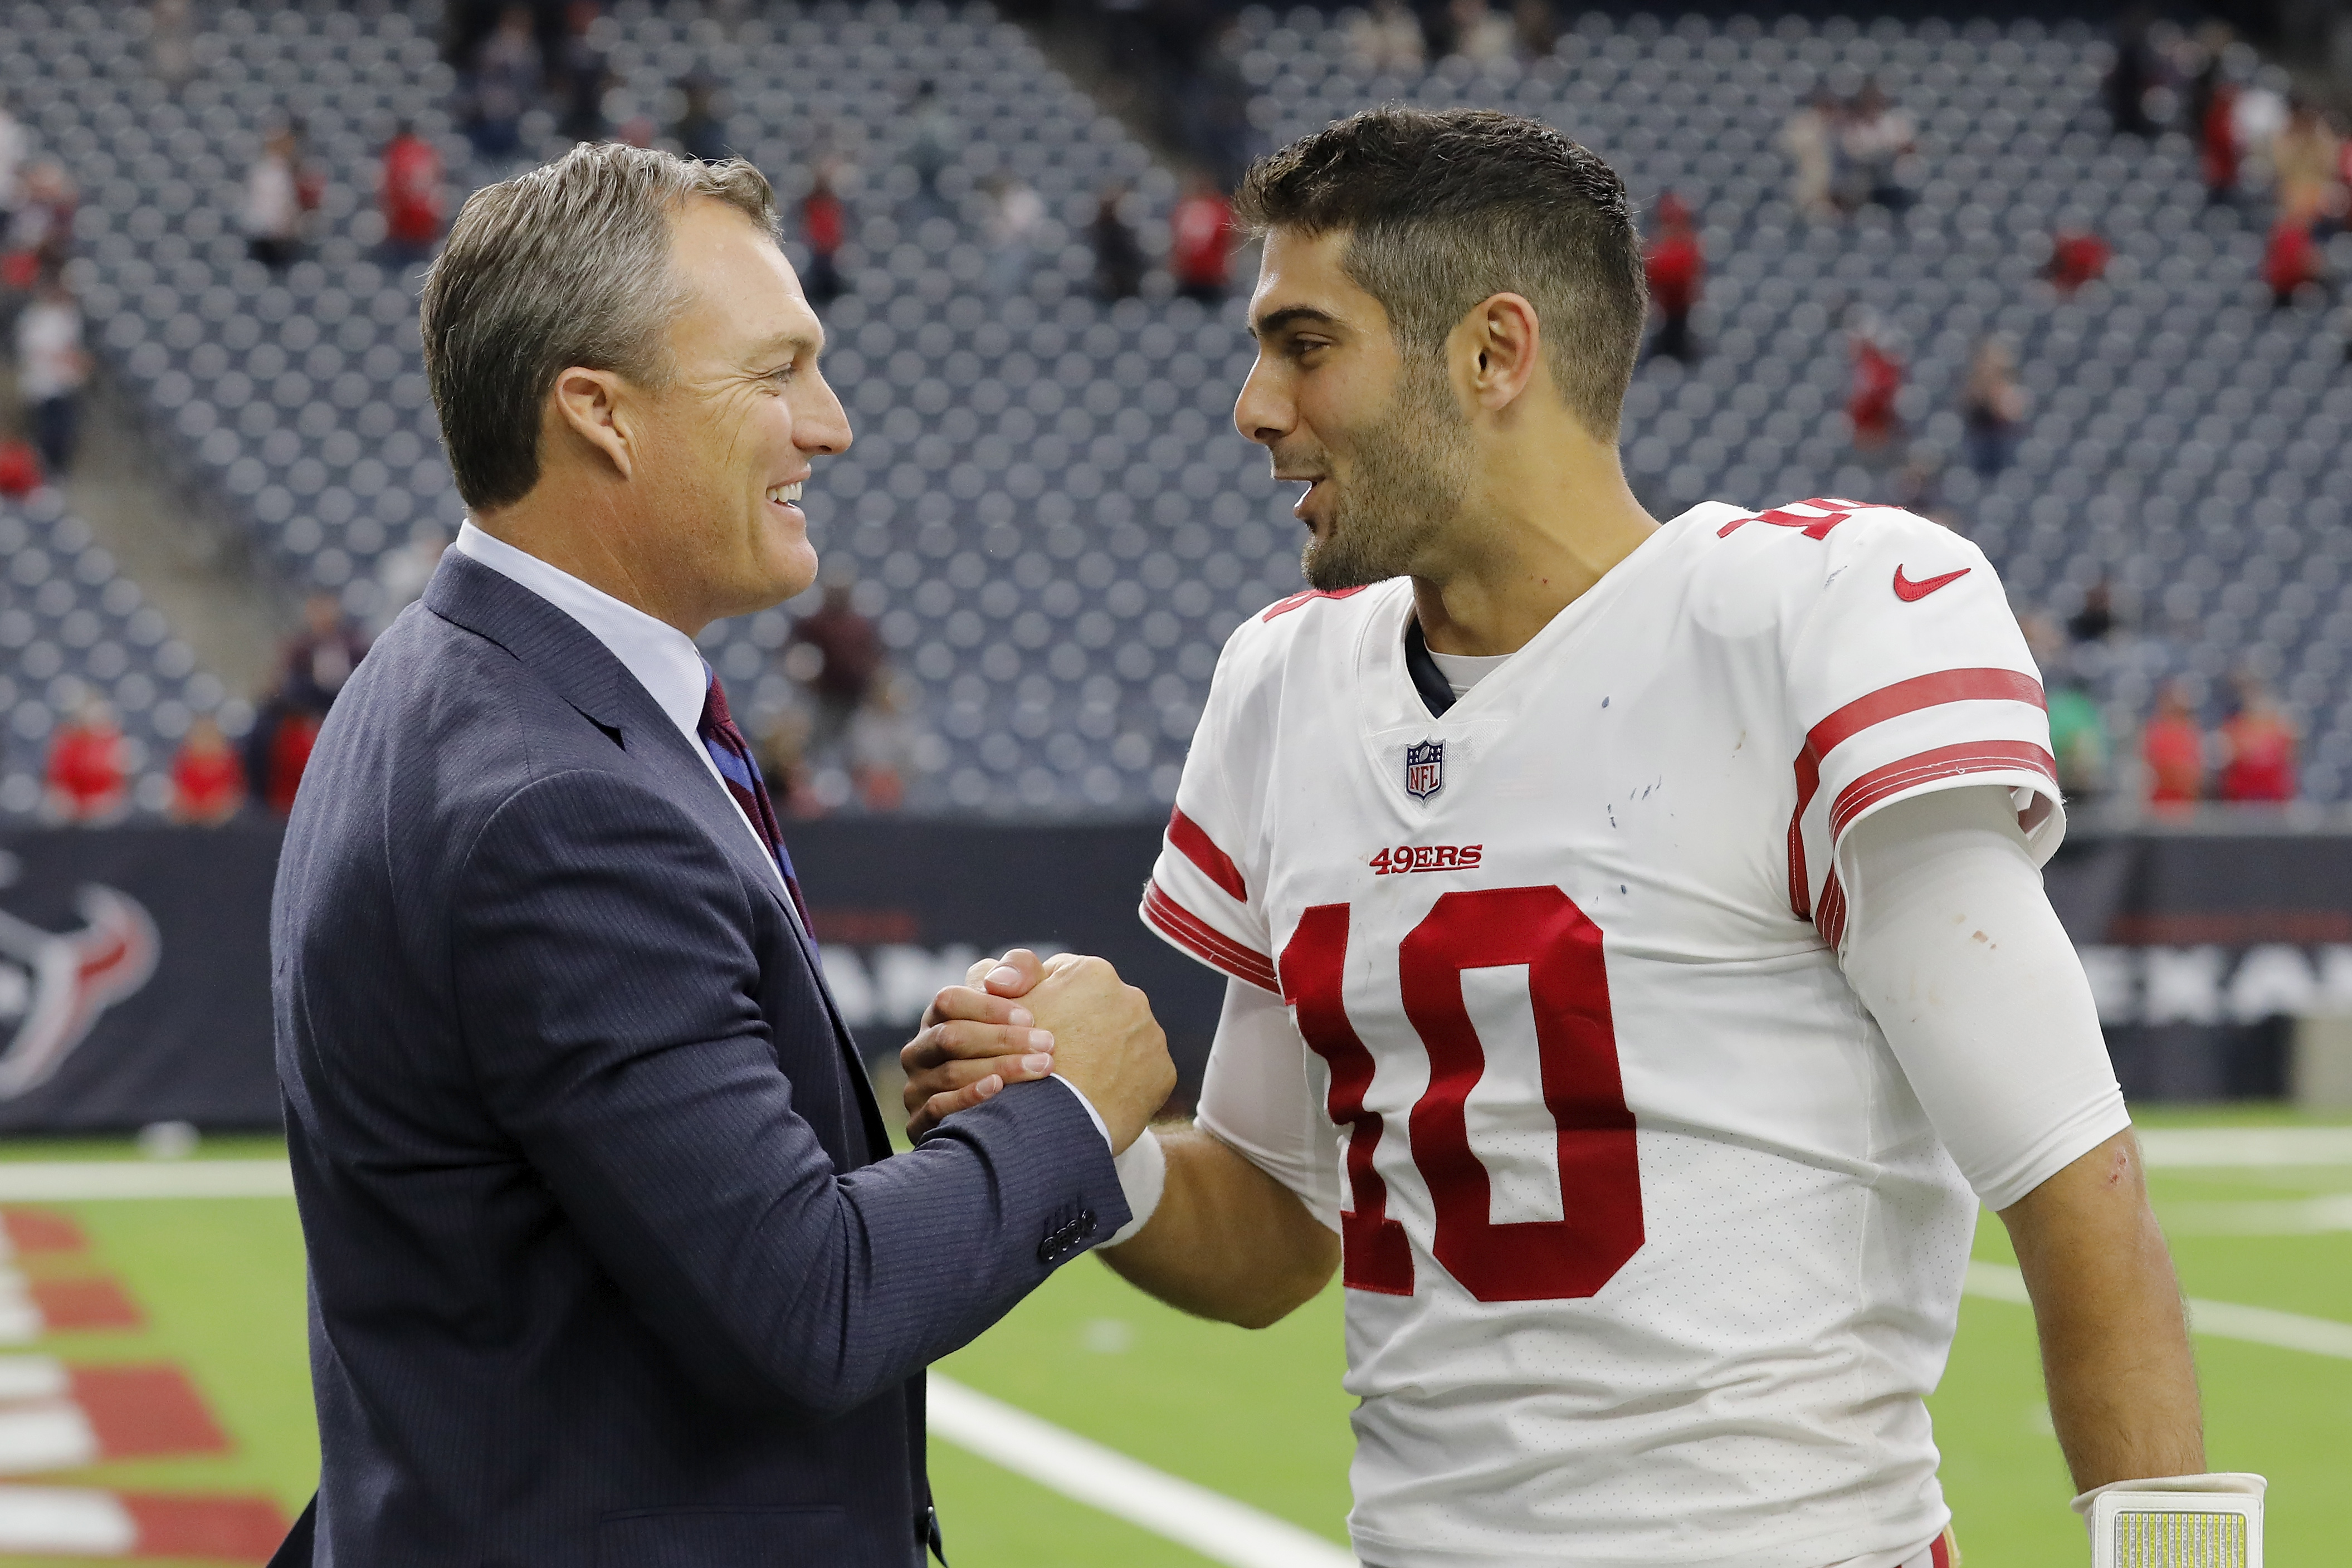 Jimmy Garoppolo said Tuesday he expects to be traded by the 49ers